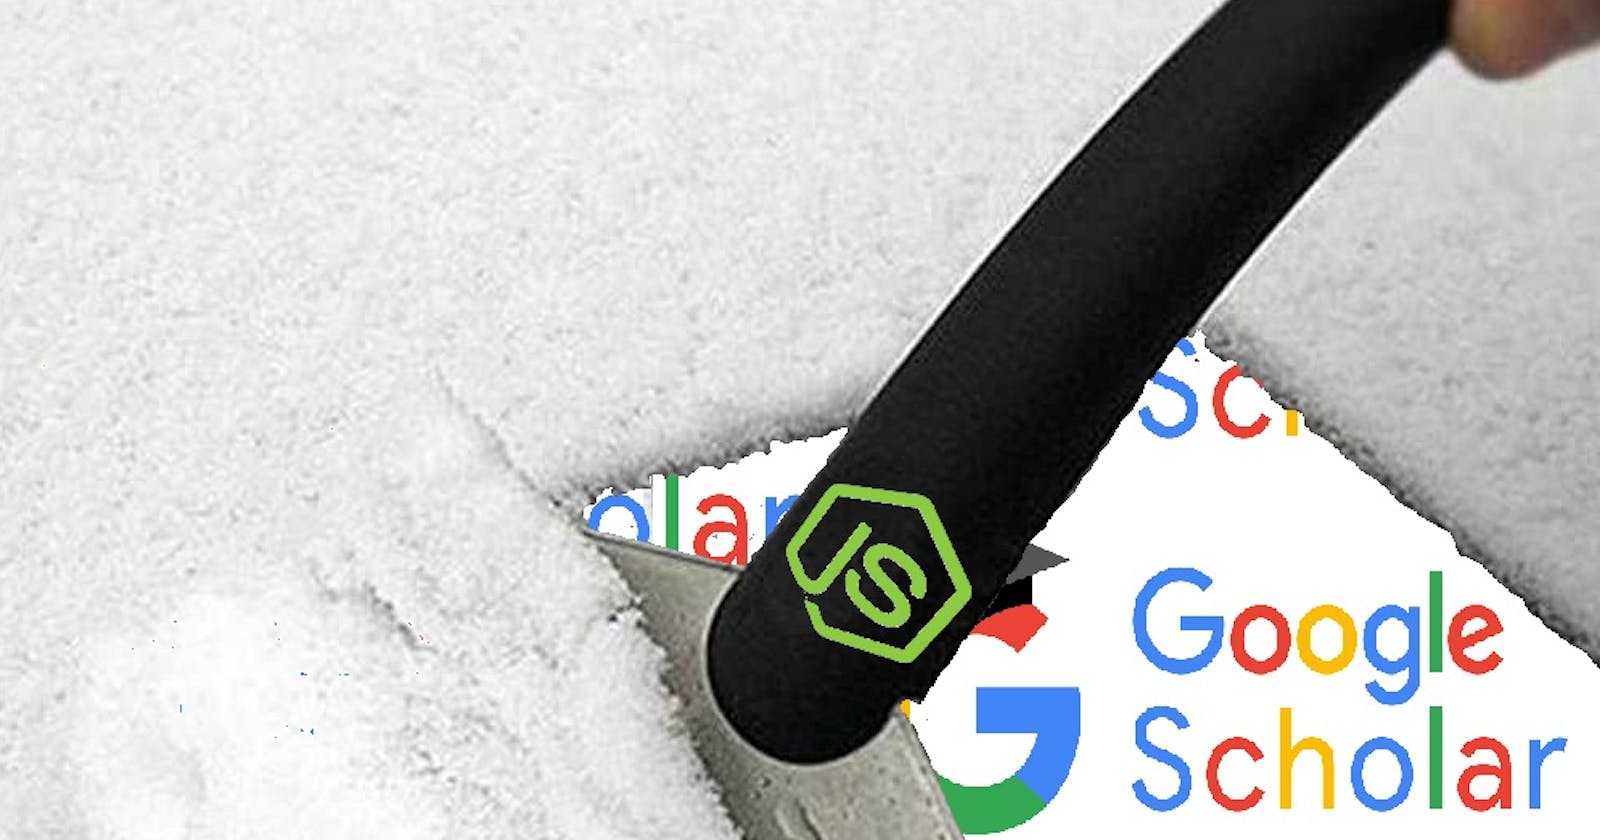 How to scrape Google Scholar profiles results with Node.js